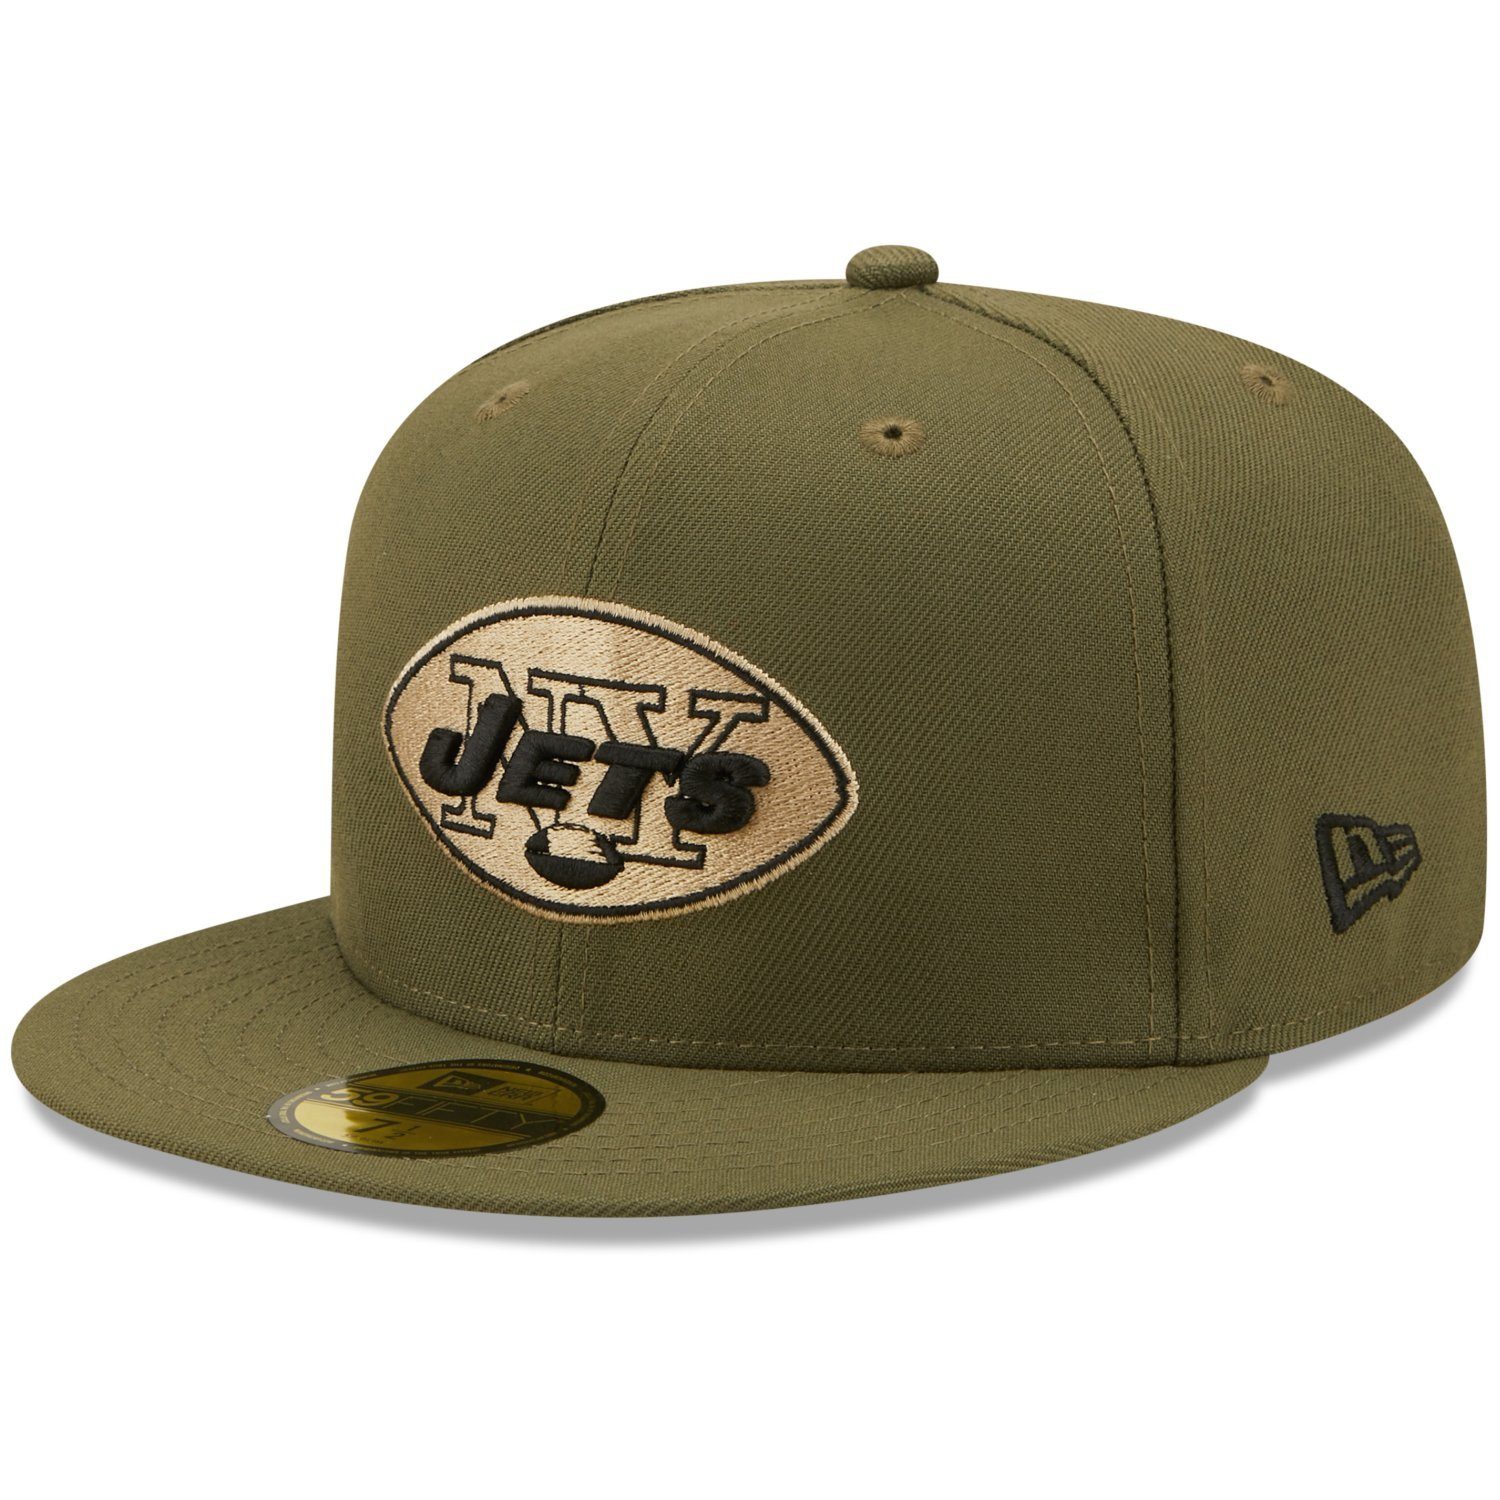 New Fitted Cap 59Fifty ProBowl Jets NFL Superbowl Throwback New Era York